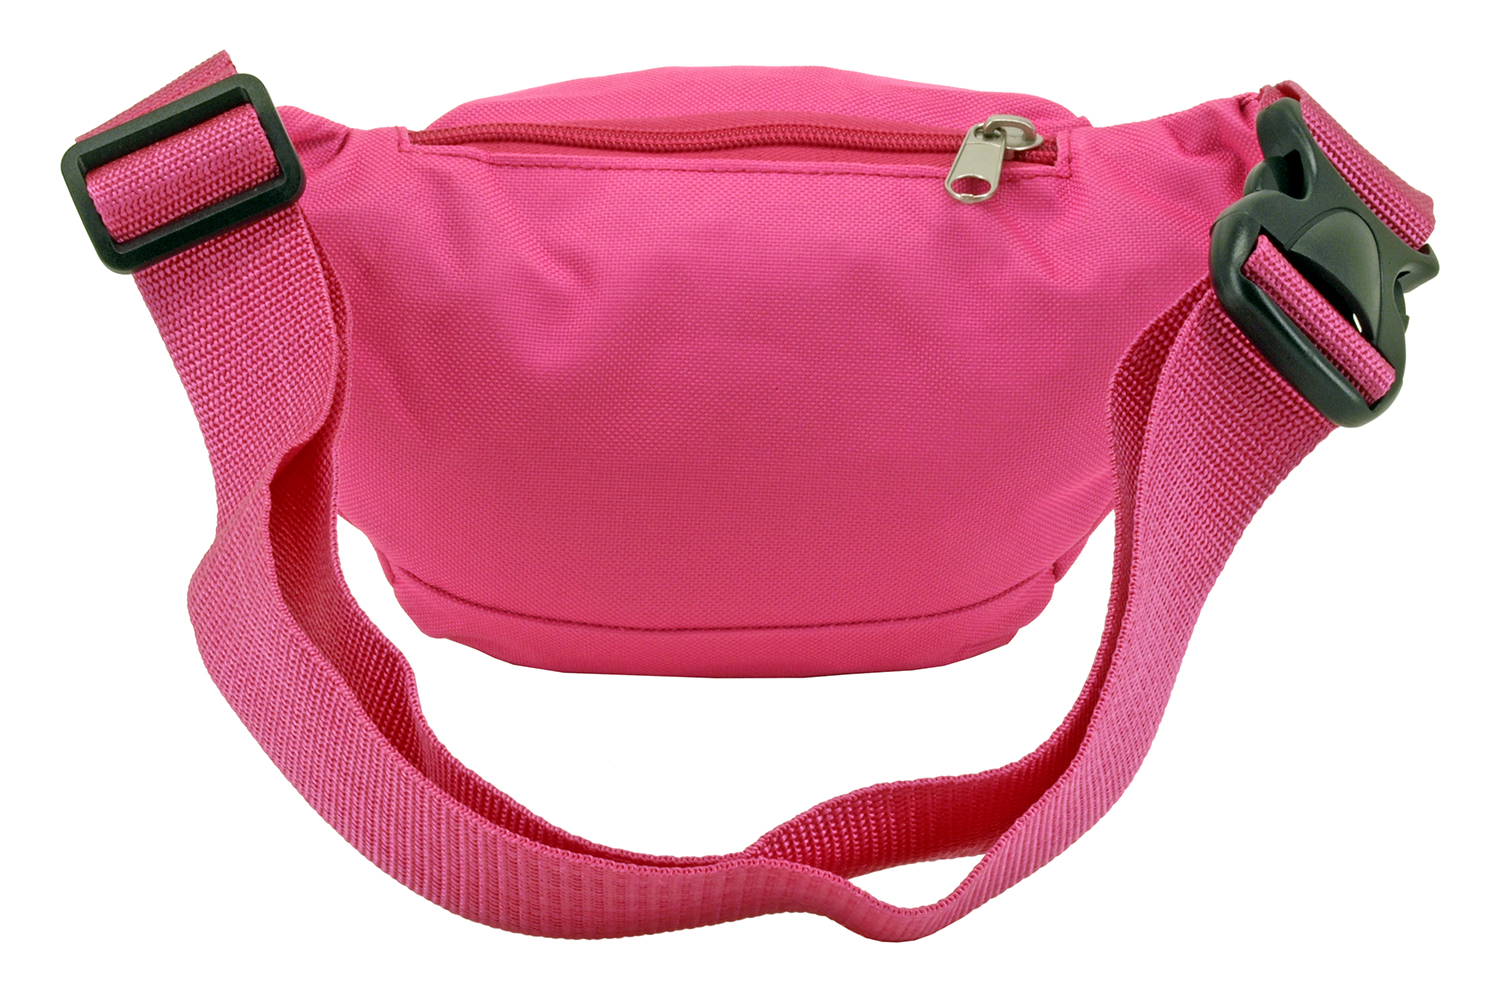 Medium Daily Fanny Pack with Pouch - Hot Pink